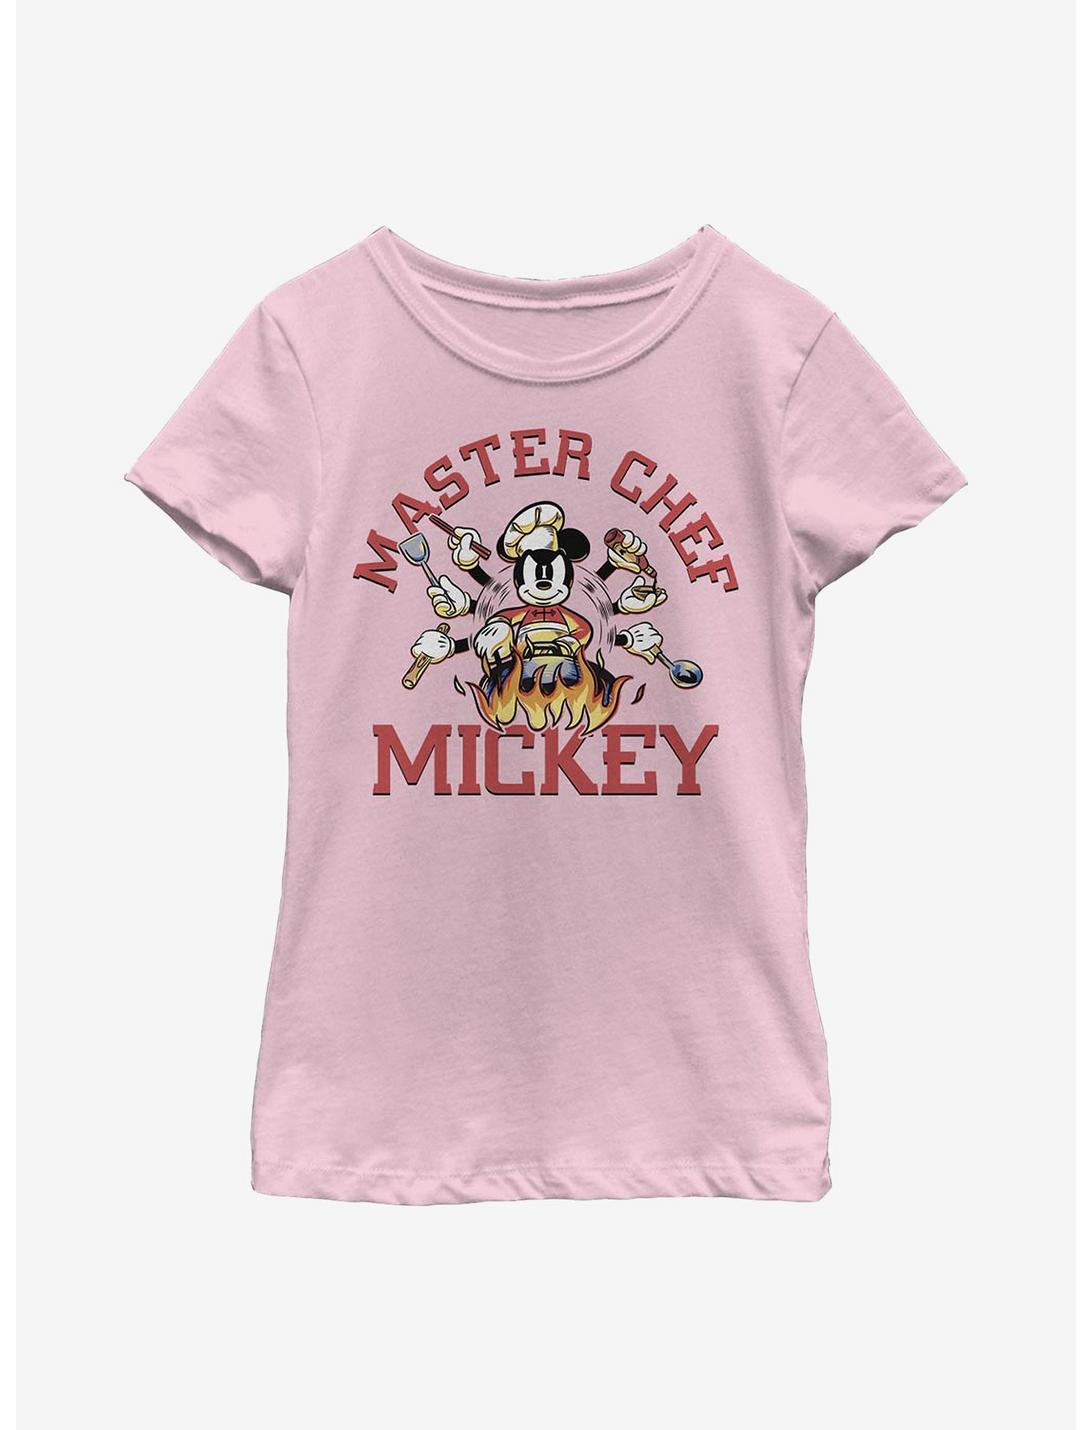 Disney Mickey Mouse Master Chef Youth Girls T-Shirt, PINK, hi-res